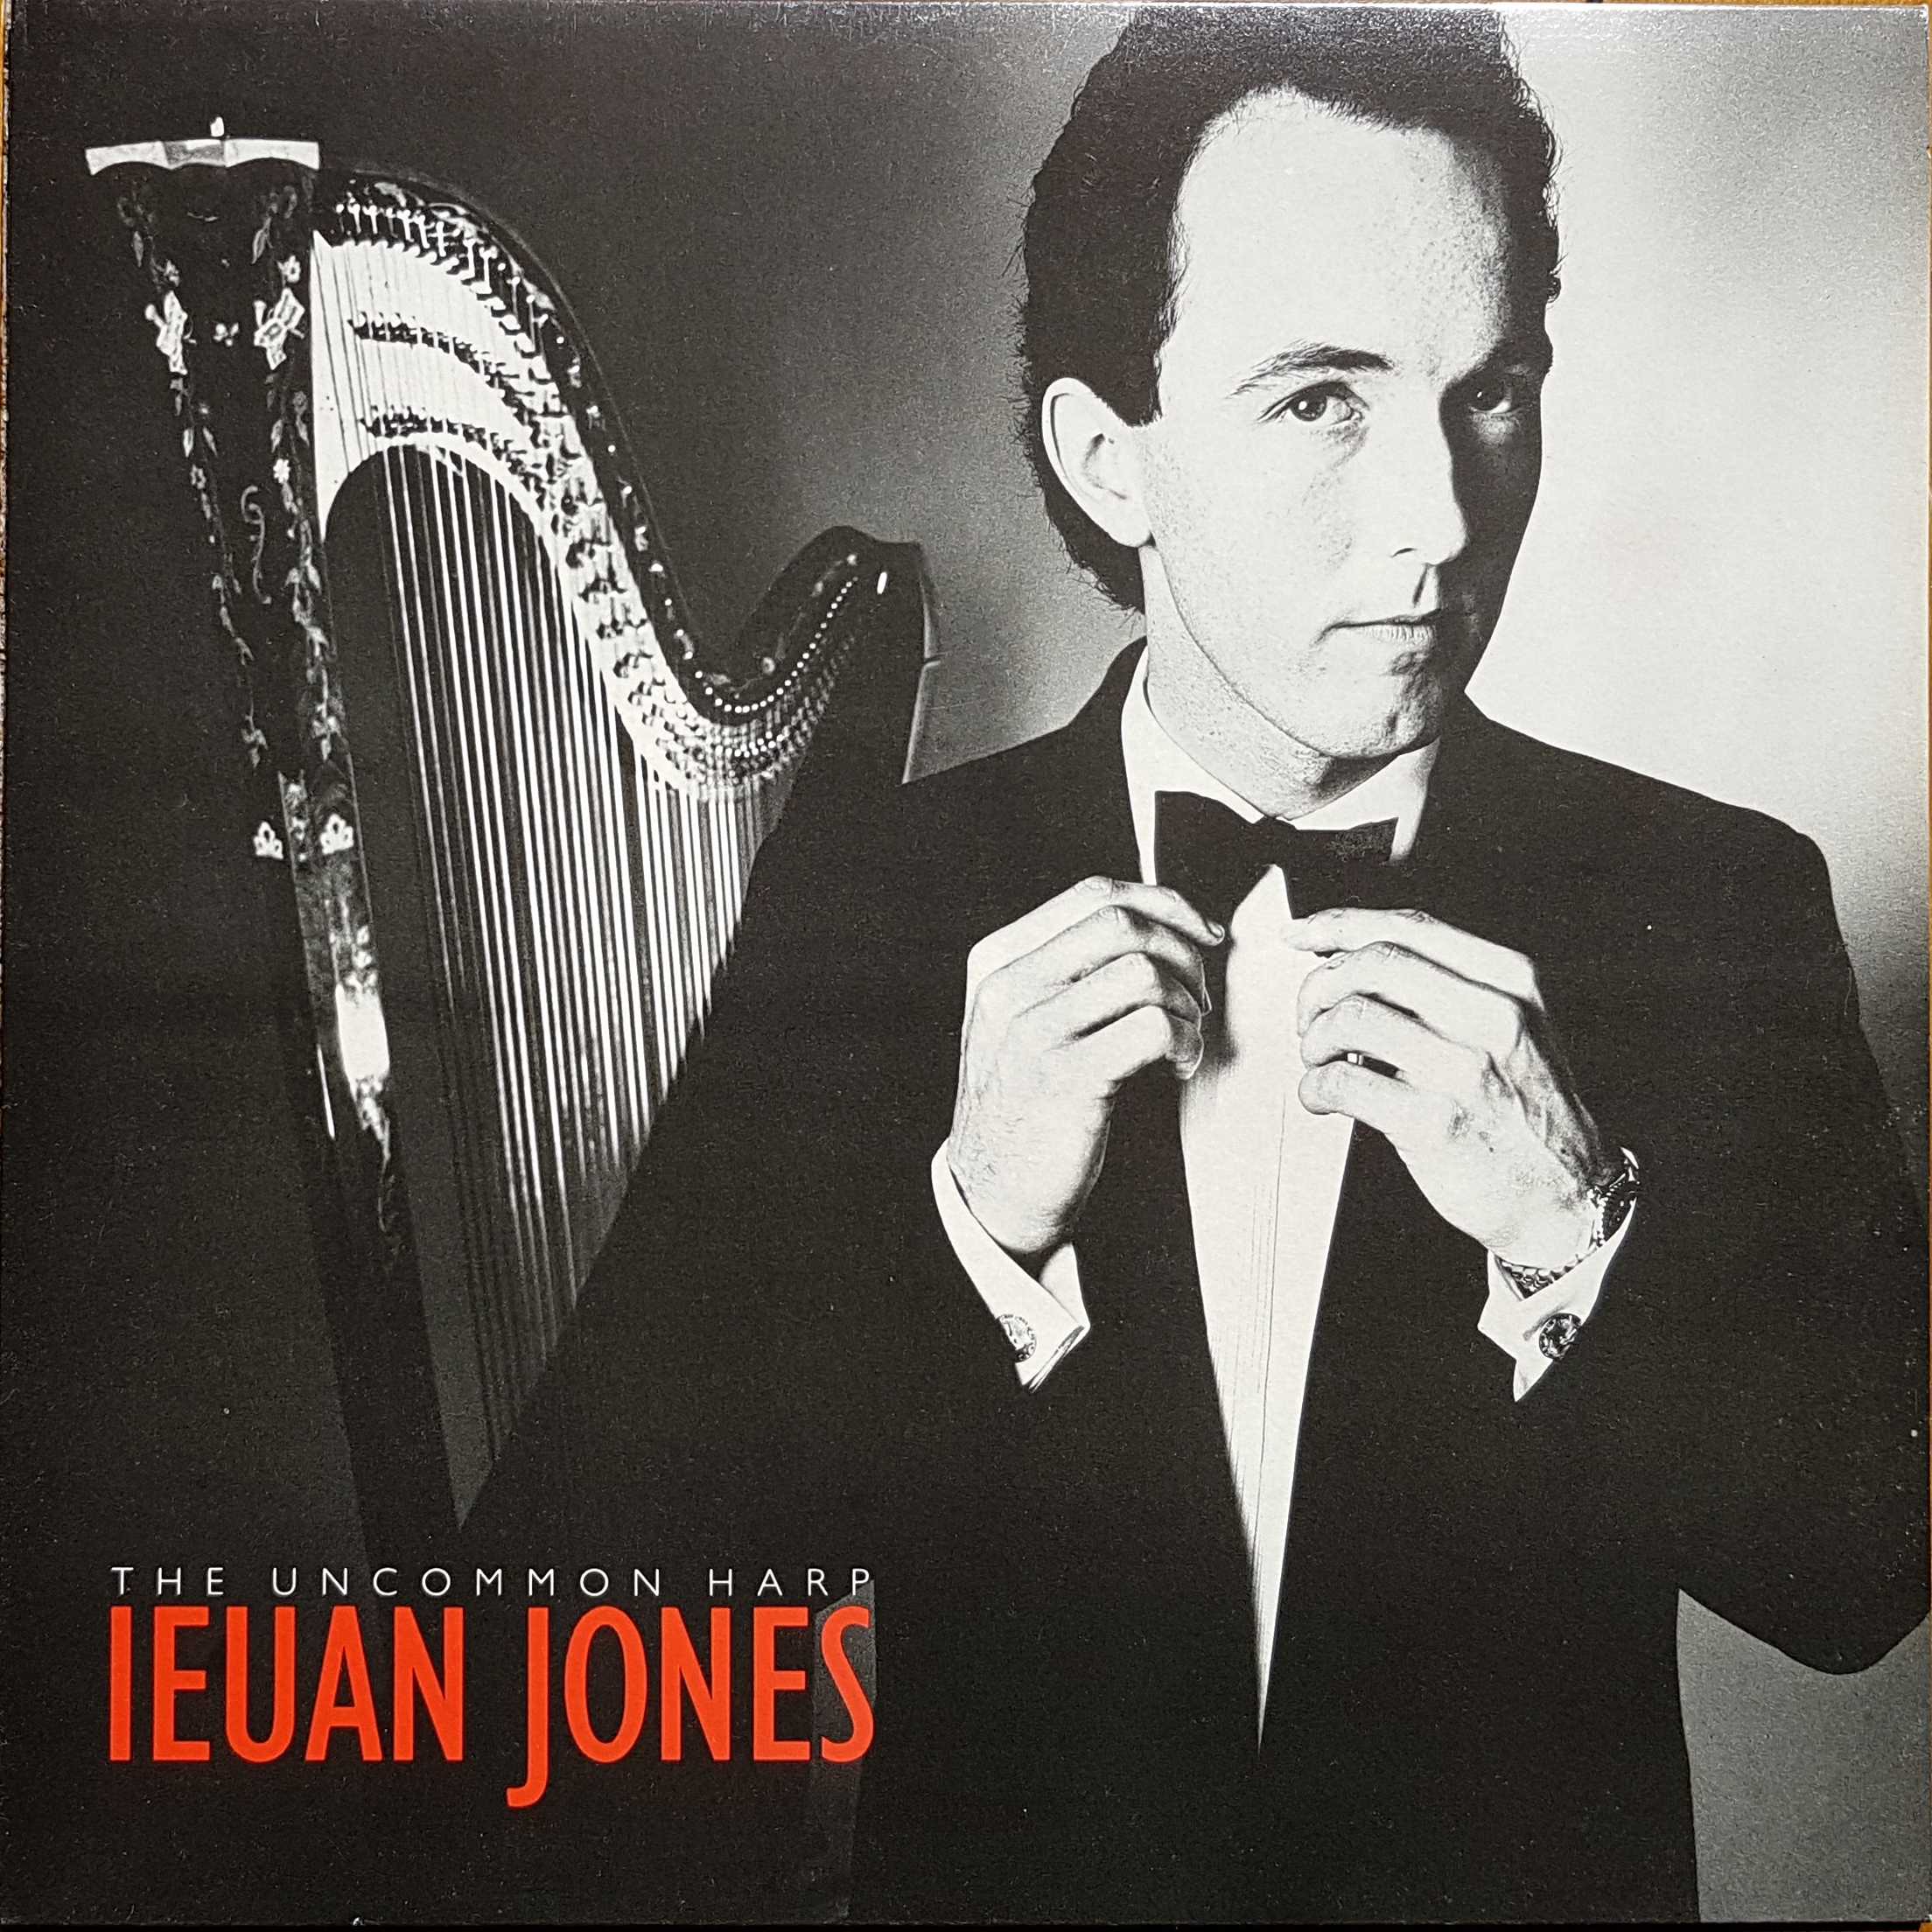 Picture of REN 636 The uncommon harp by artist Ieuan Jones from the BBC albums - Records and Tapes library